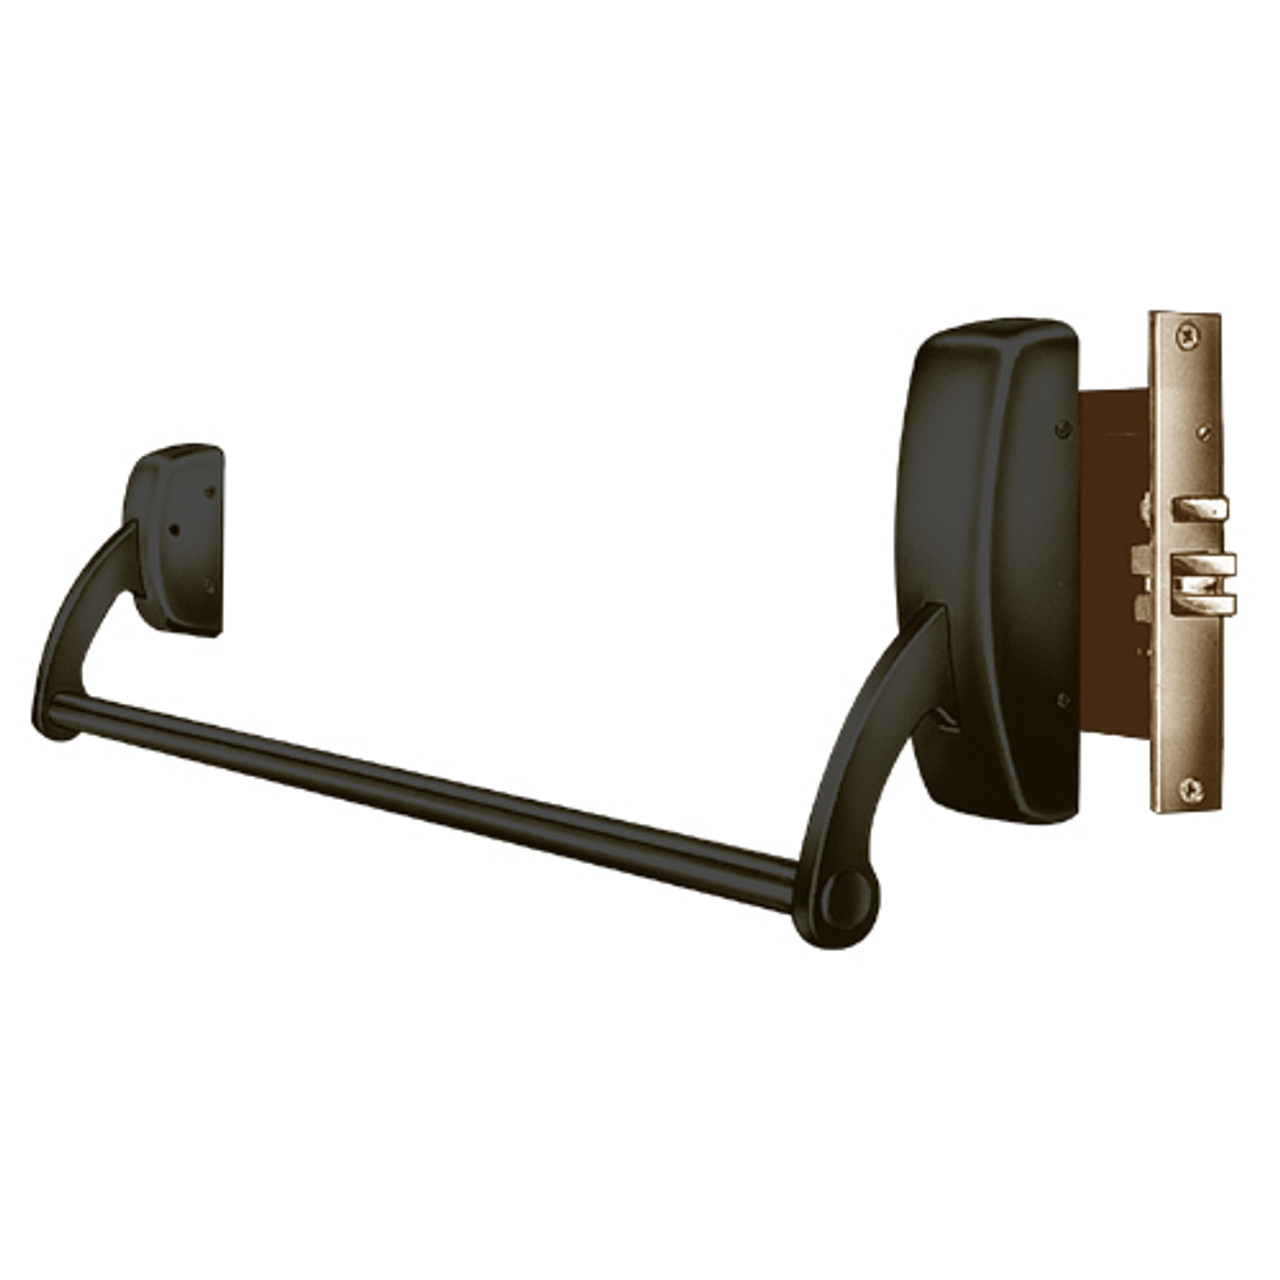 12-9910-LHR-10B Sargent 90 Series Exit Only Fire Rated Mortise Lock Exit Device in Oil Rubbed Bronze